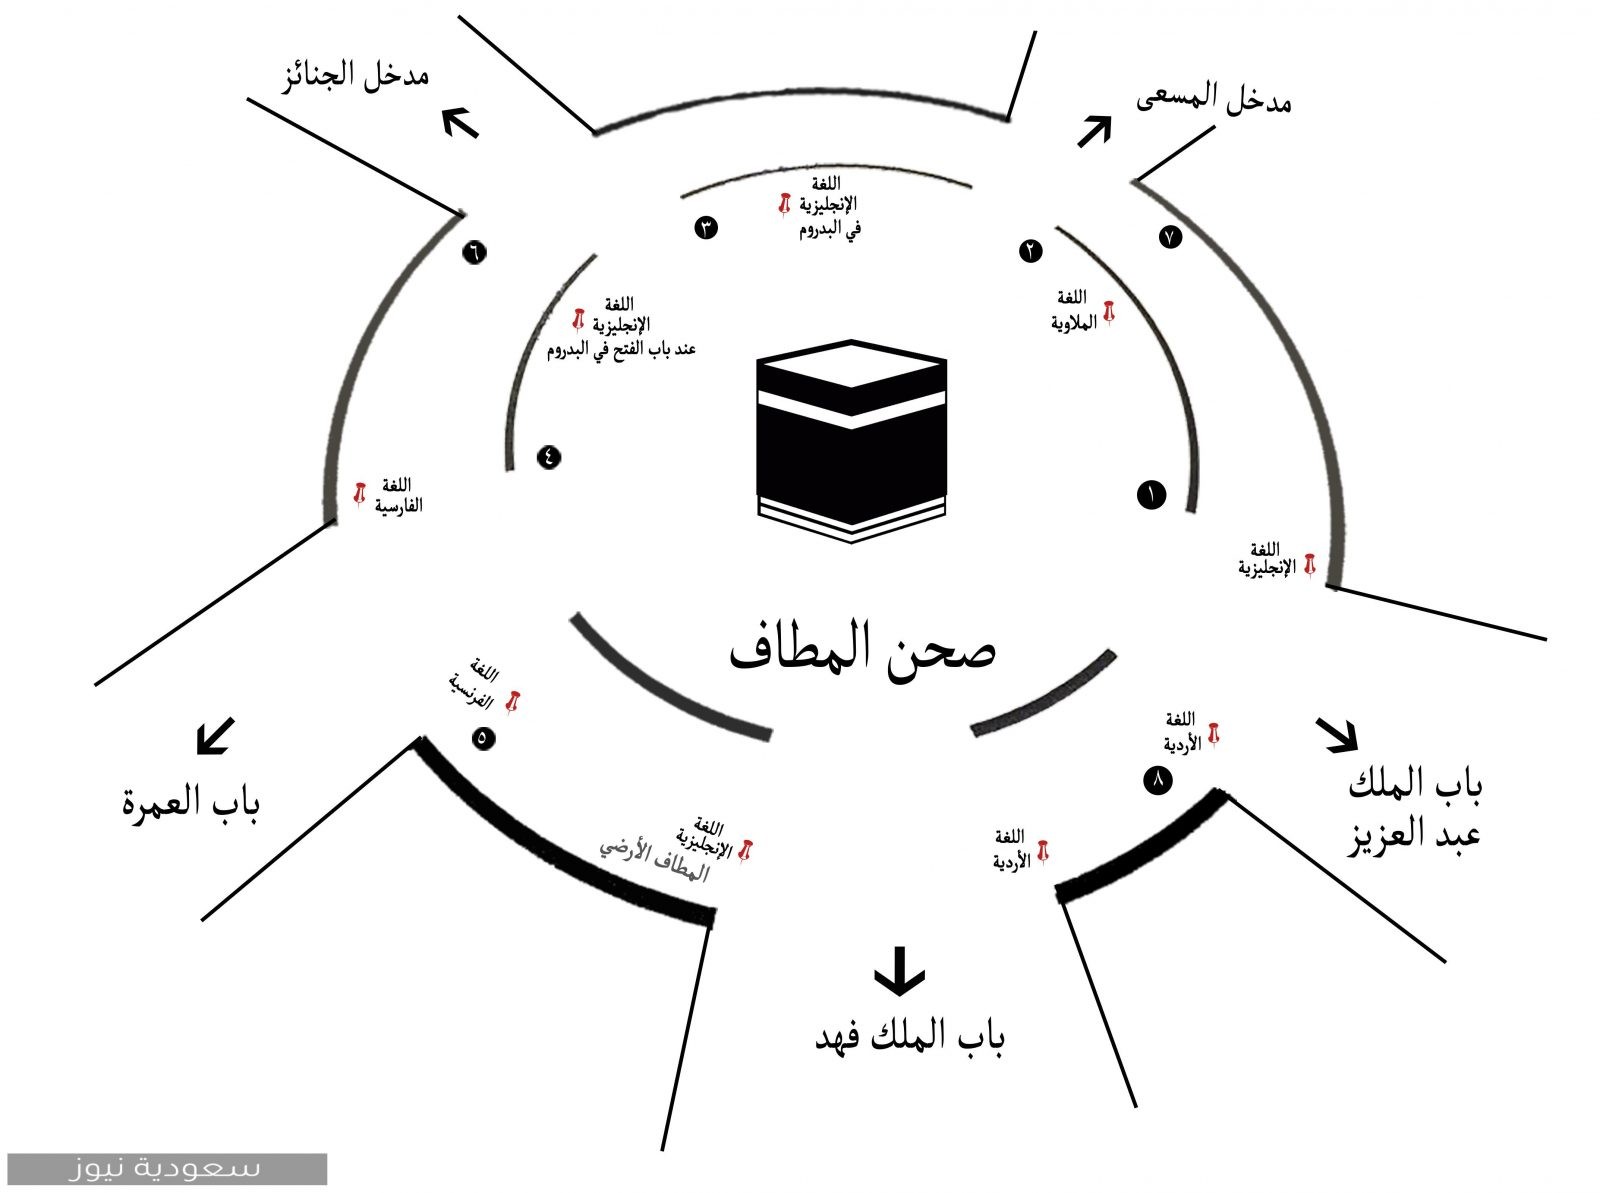 The doors of the Grand Mosque in Makkah and its expansions